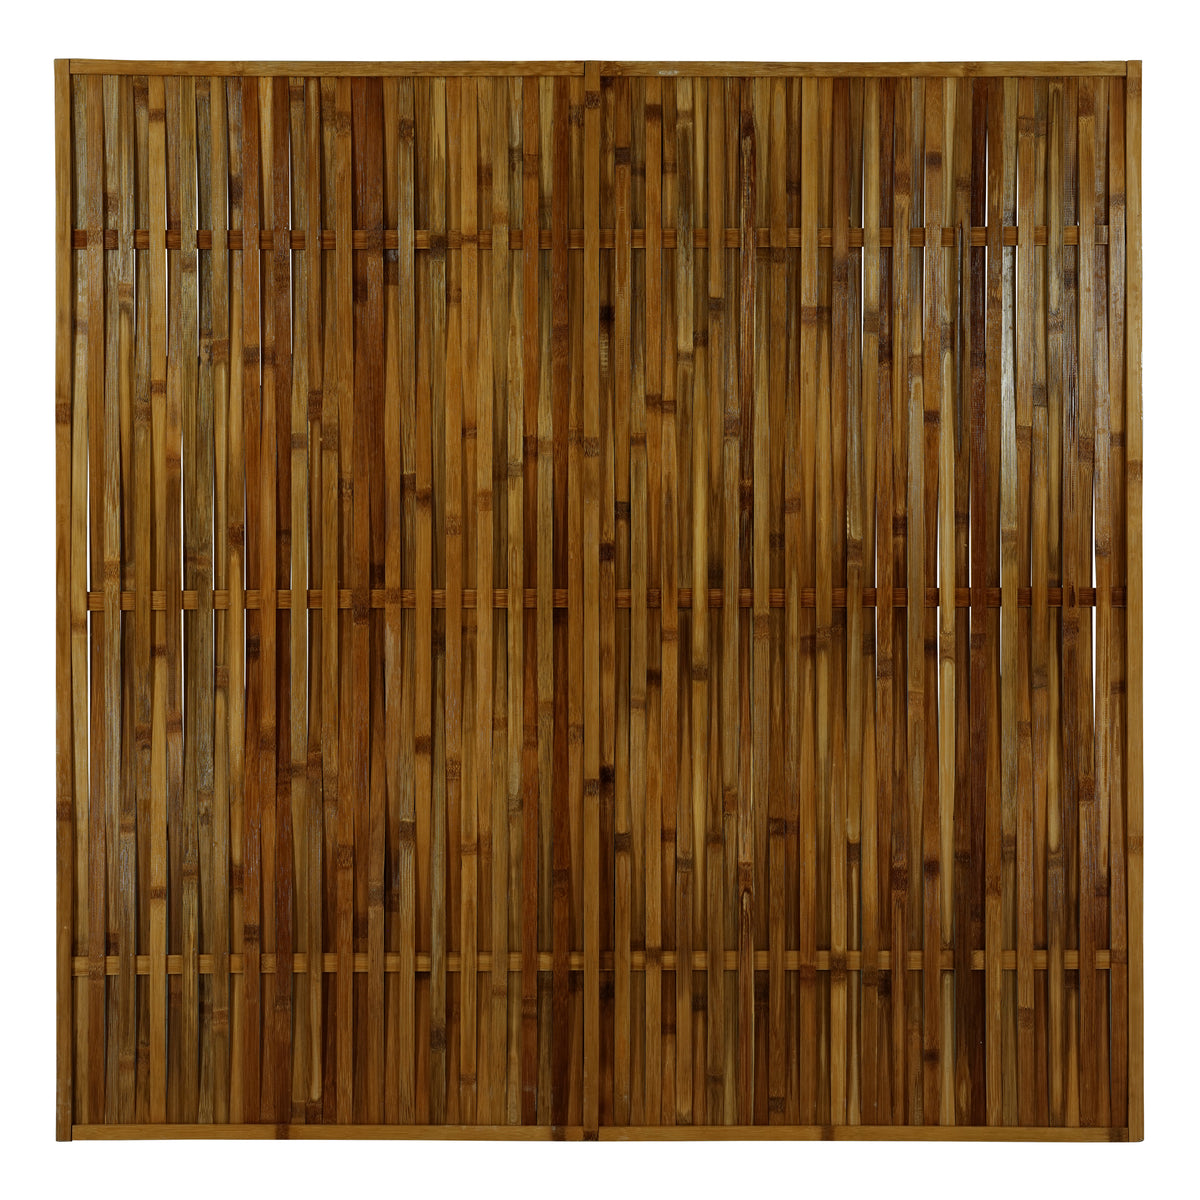 Bamboo Fence Woven